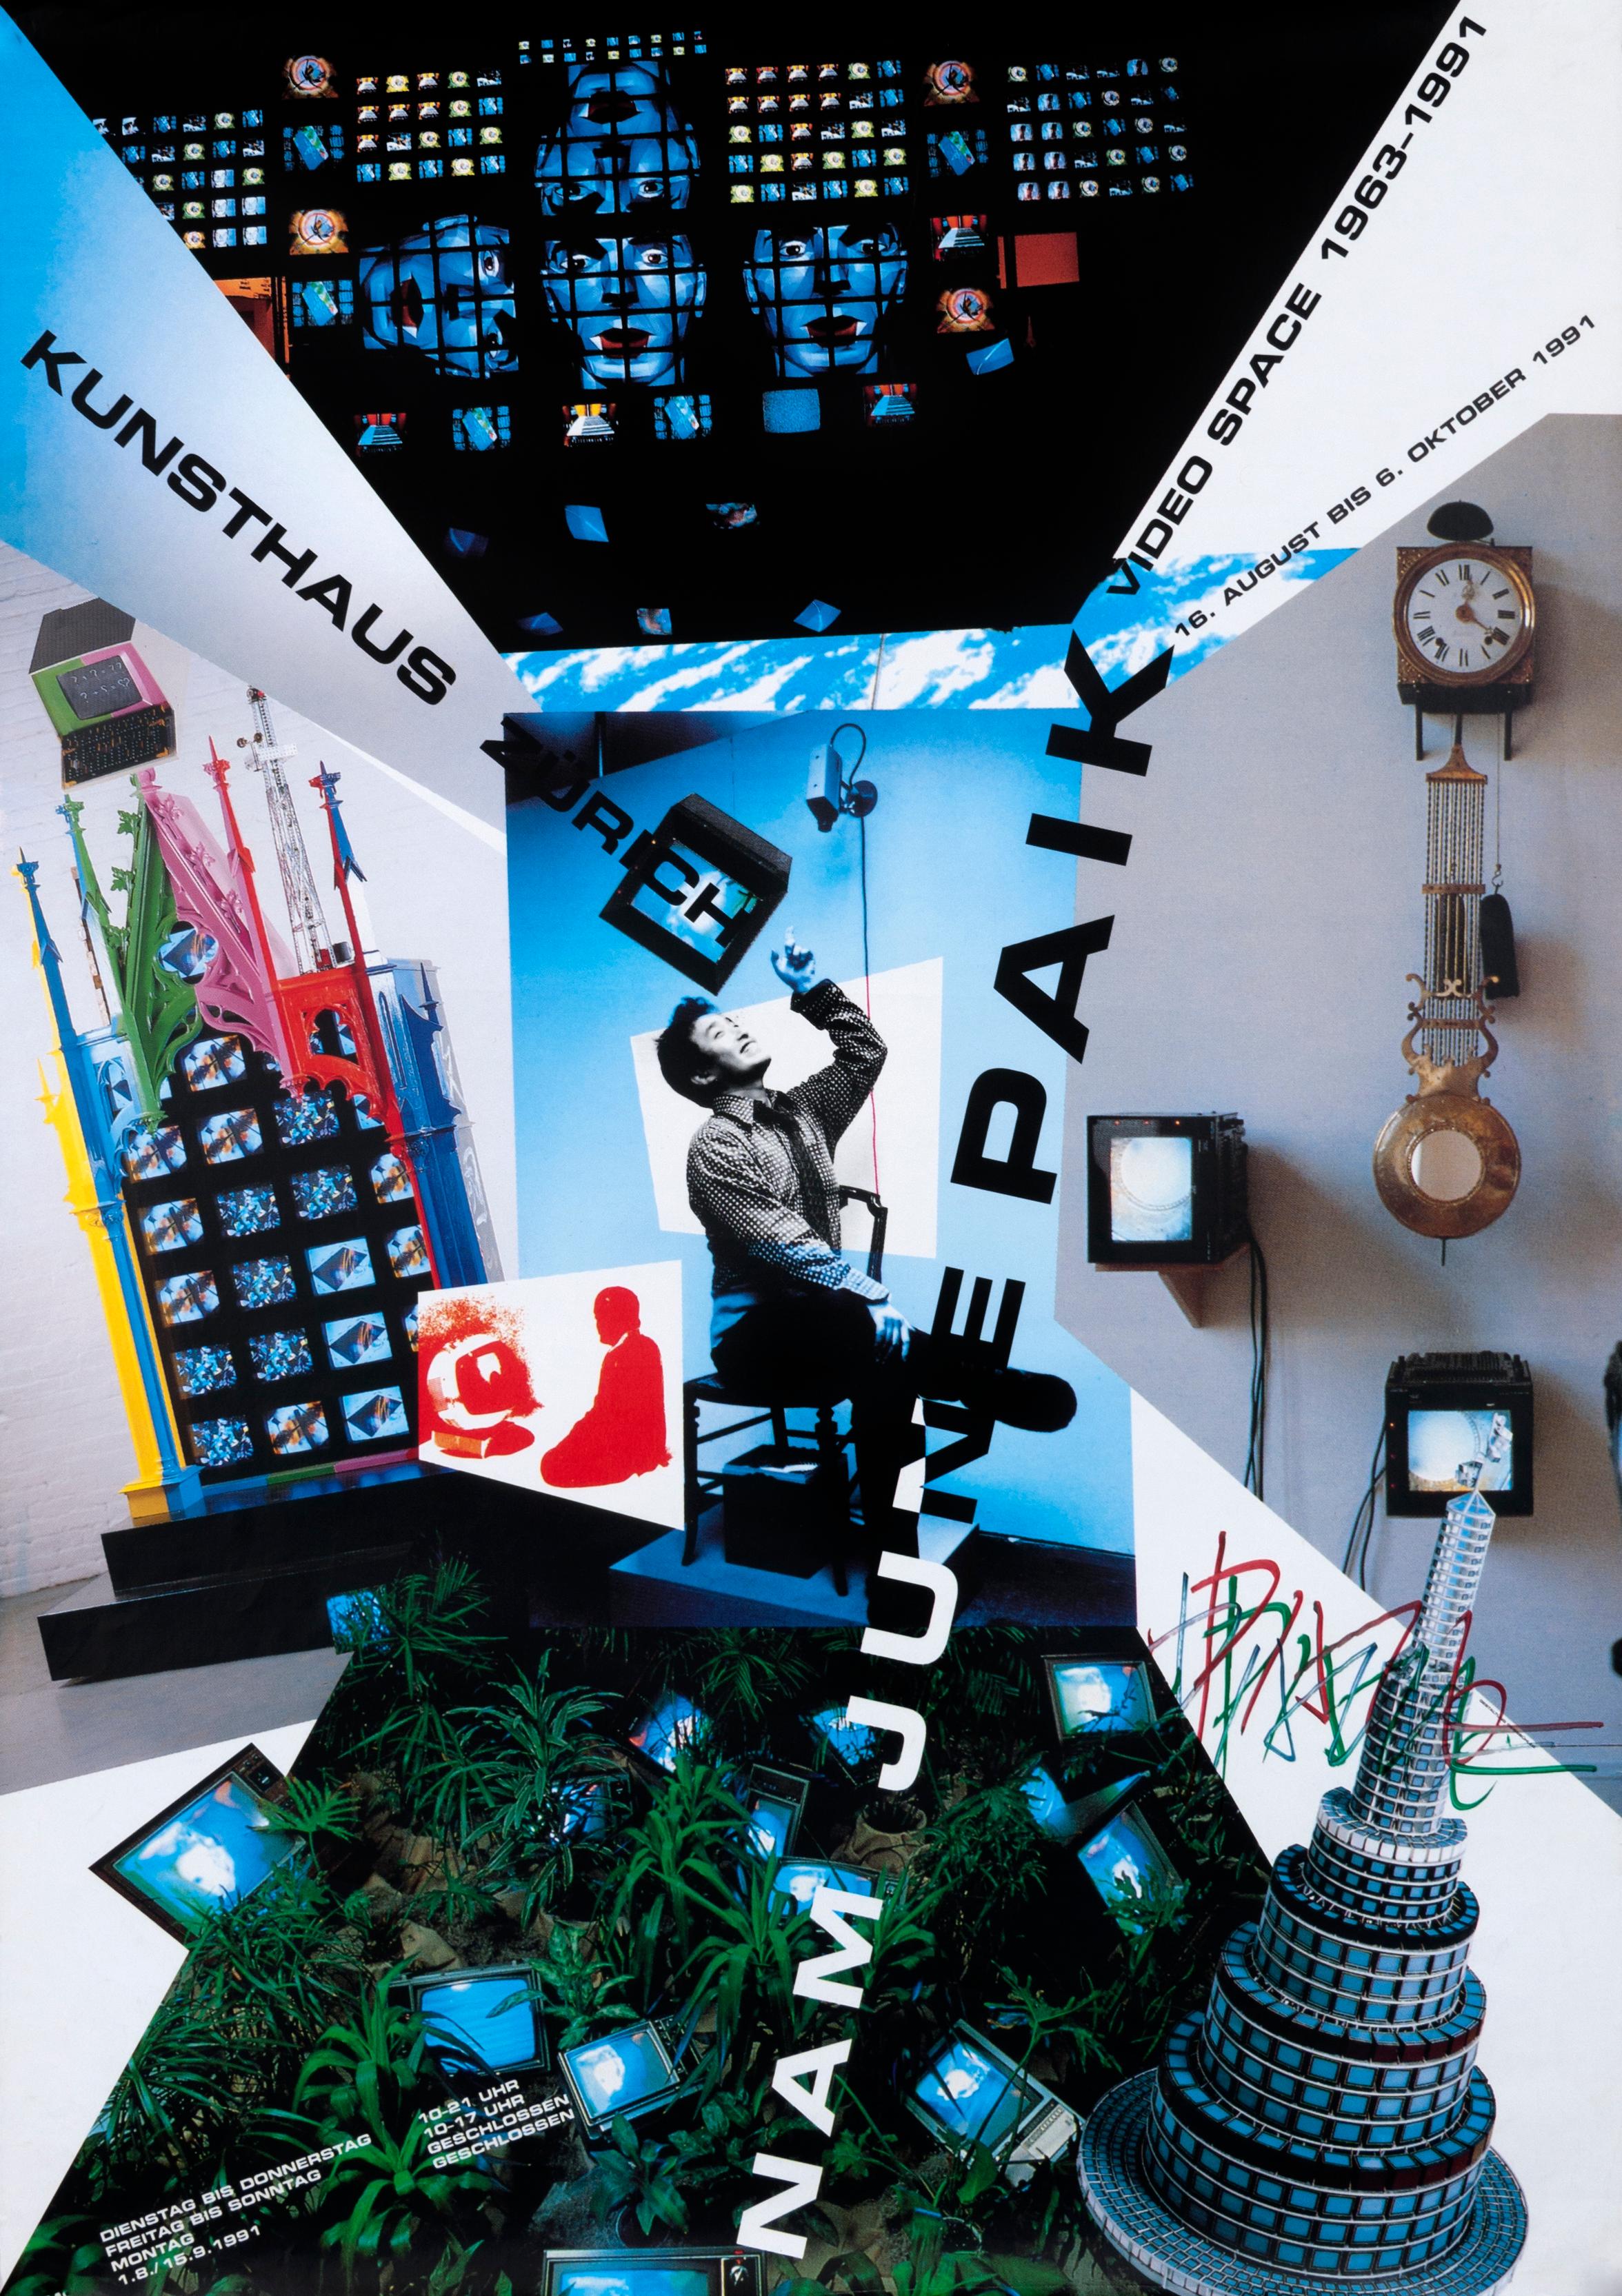 "Nam June Paik - Video Space 1963-1991" Contemporary Art Exhibition Poster - Print by Dominic Karl Geissbuhler